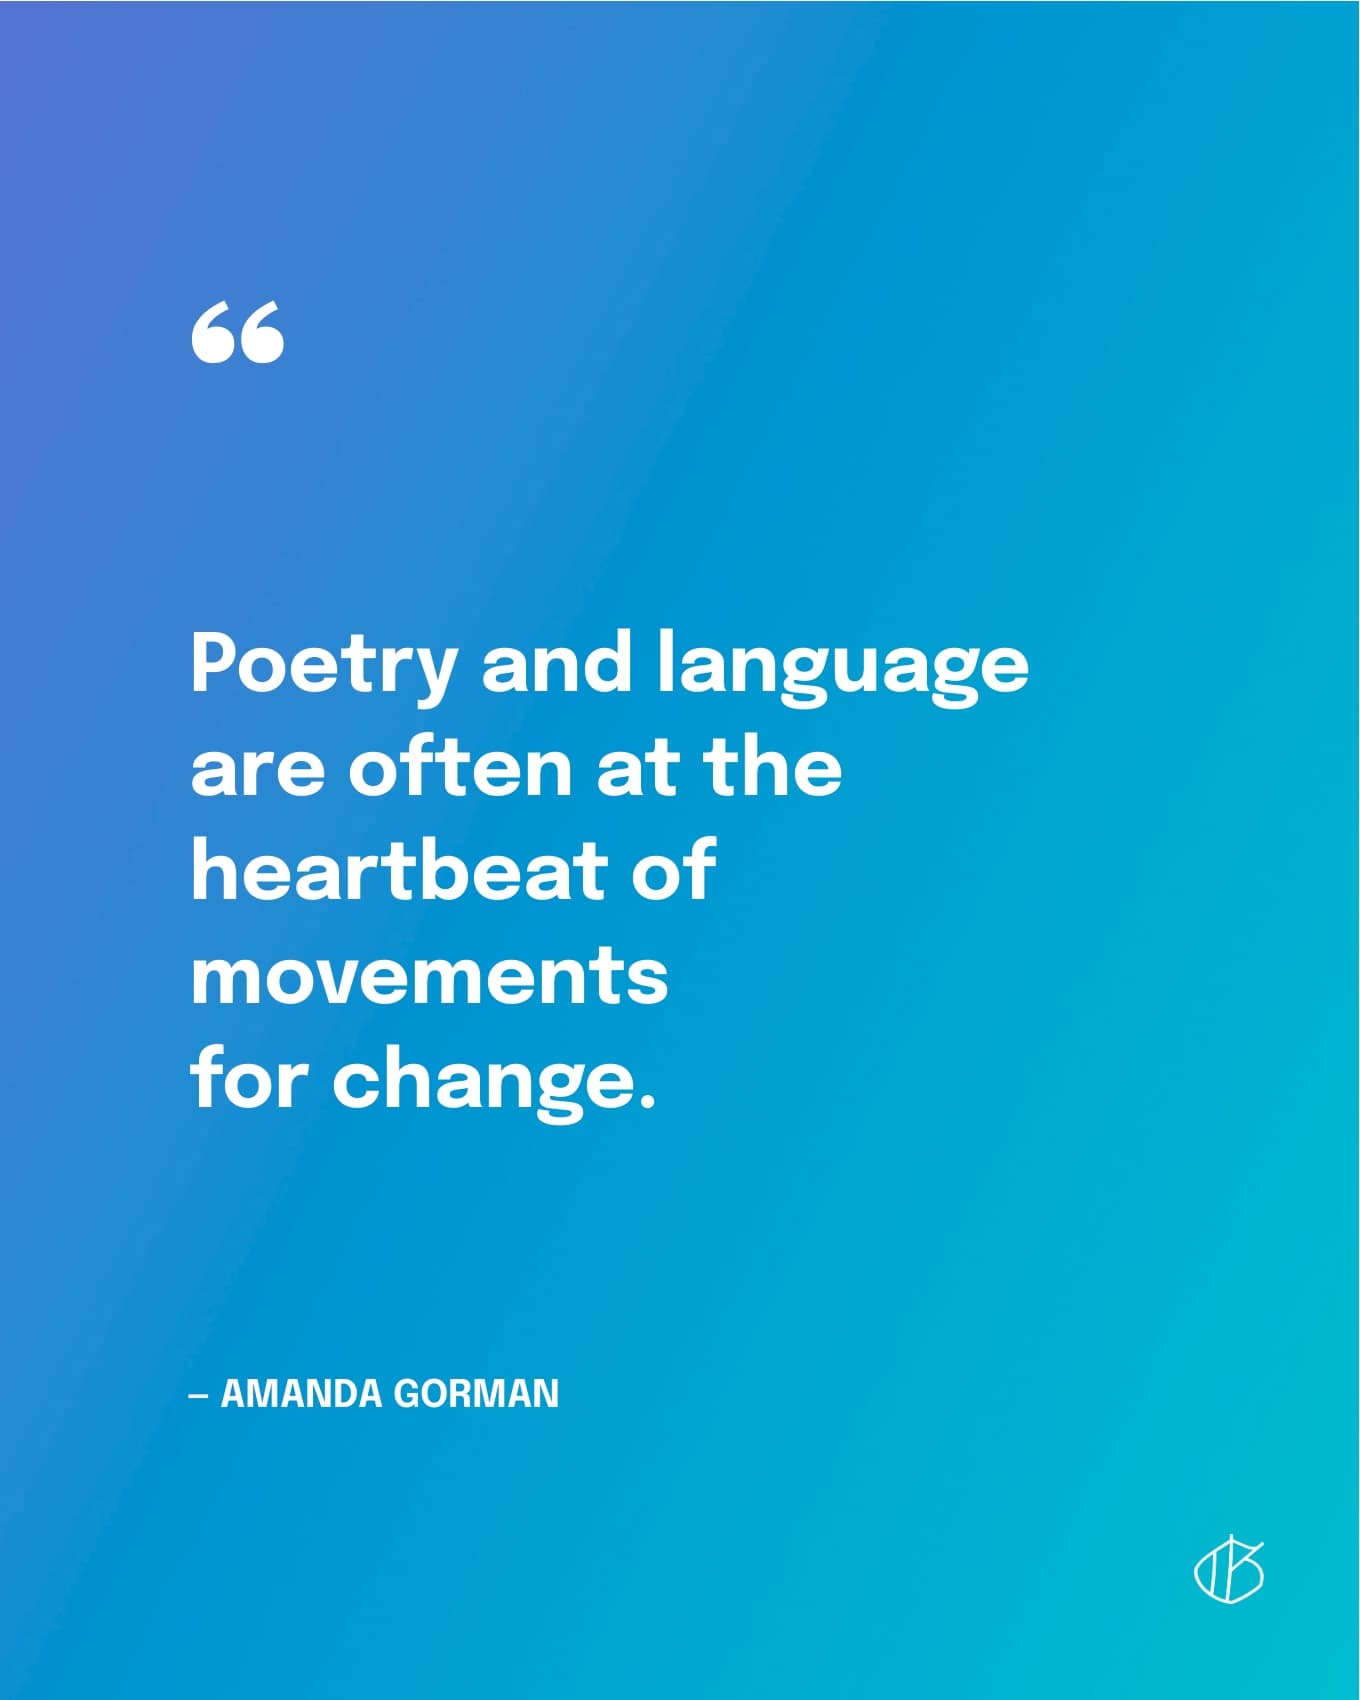 Poetry and language are often at the heartbeat of movements for change. — Amanda Gorman